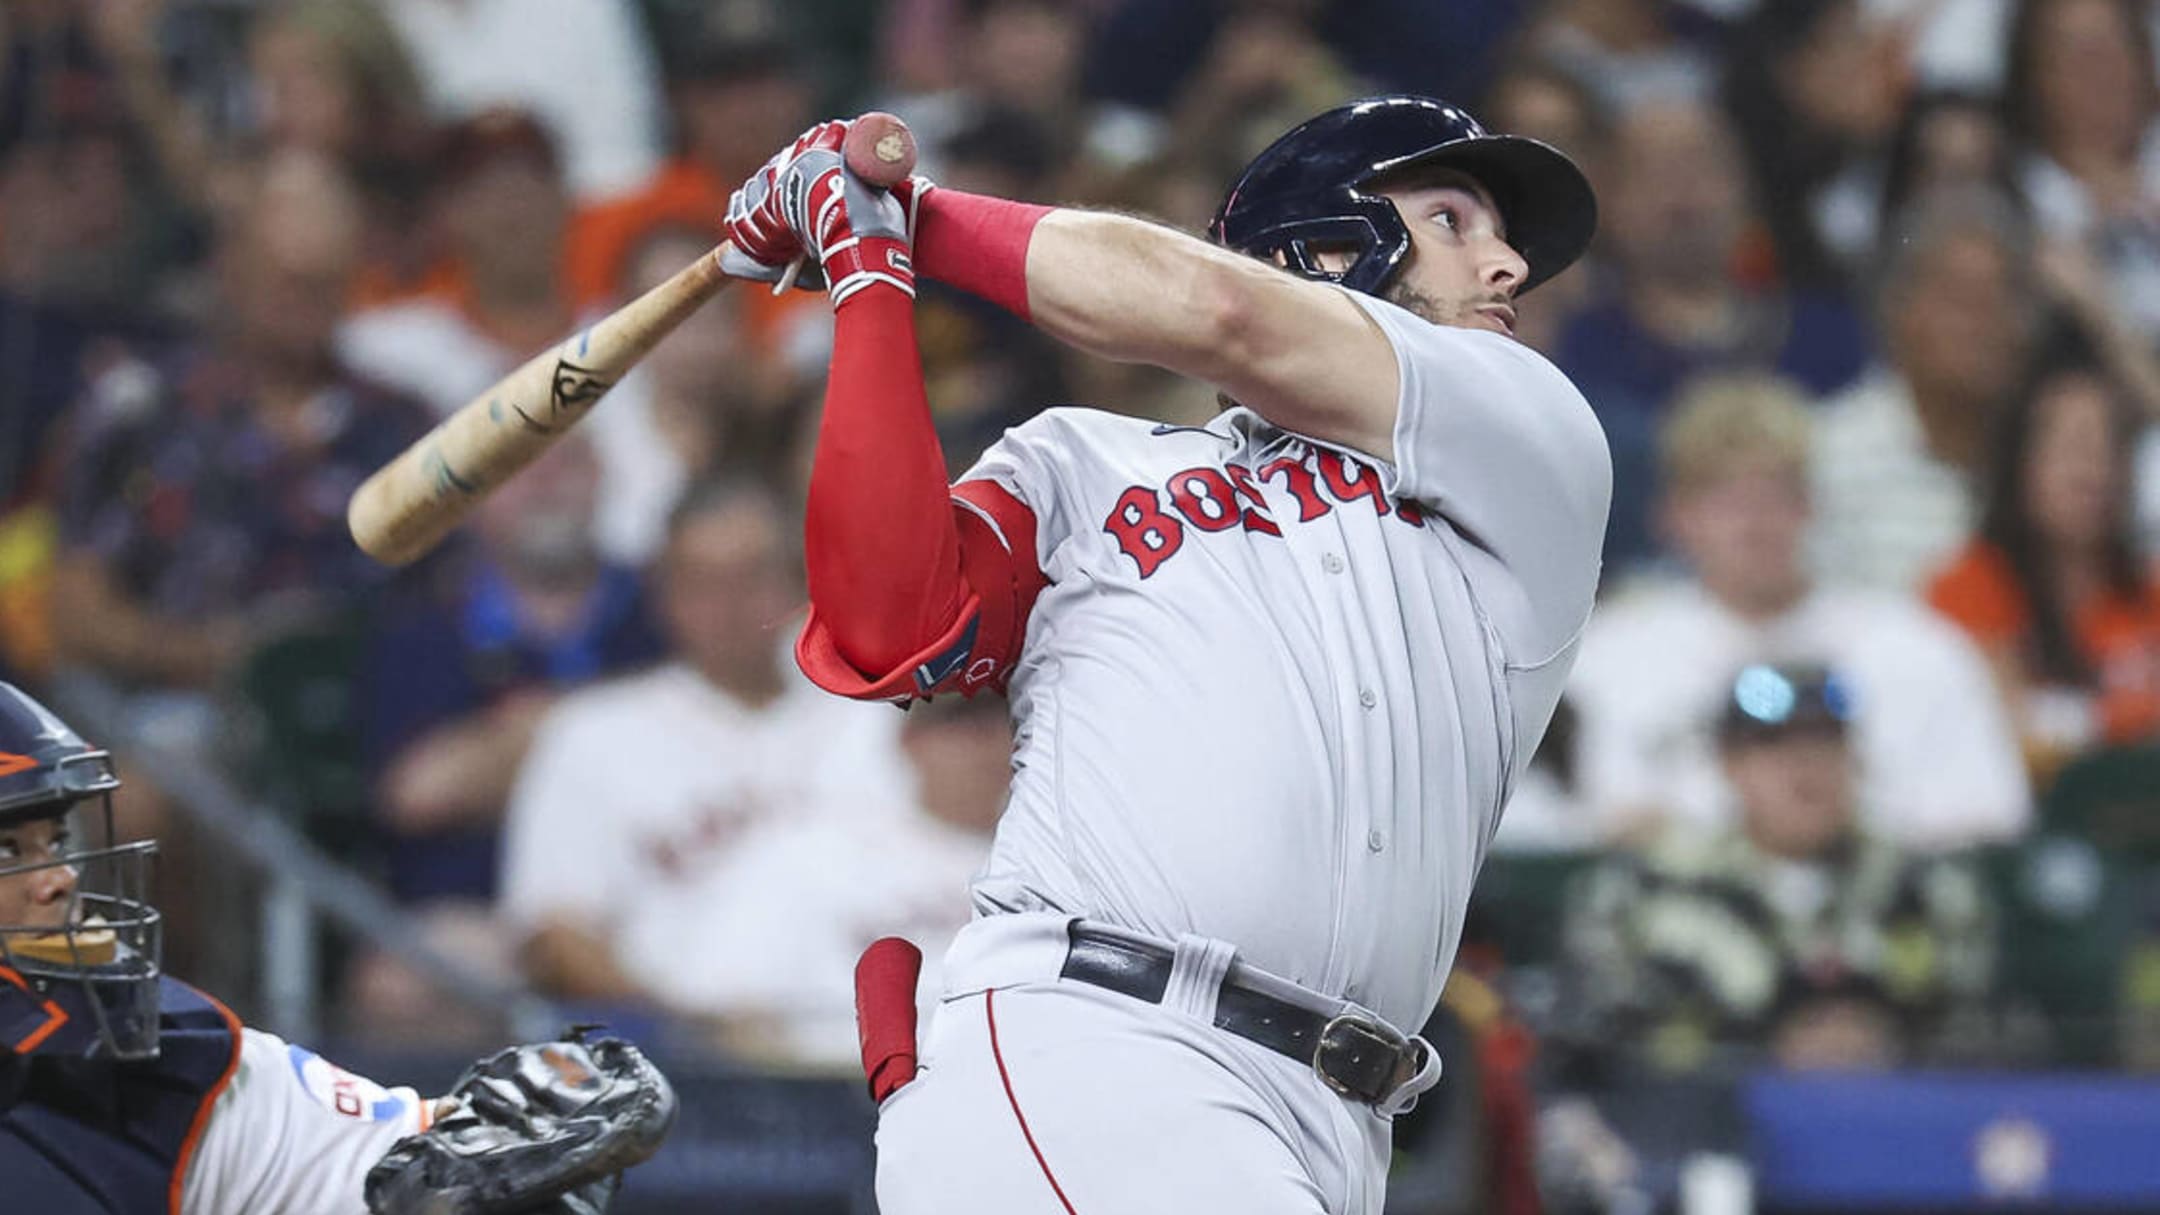 Watch Red Sox's Red-Hot Rookie Slugger Belt First MLB Home Run Vs. Astros